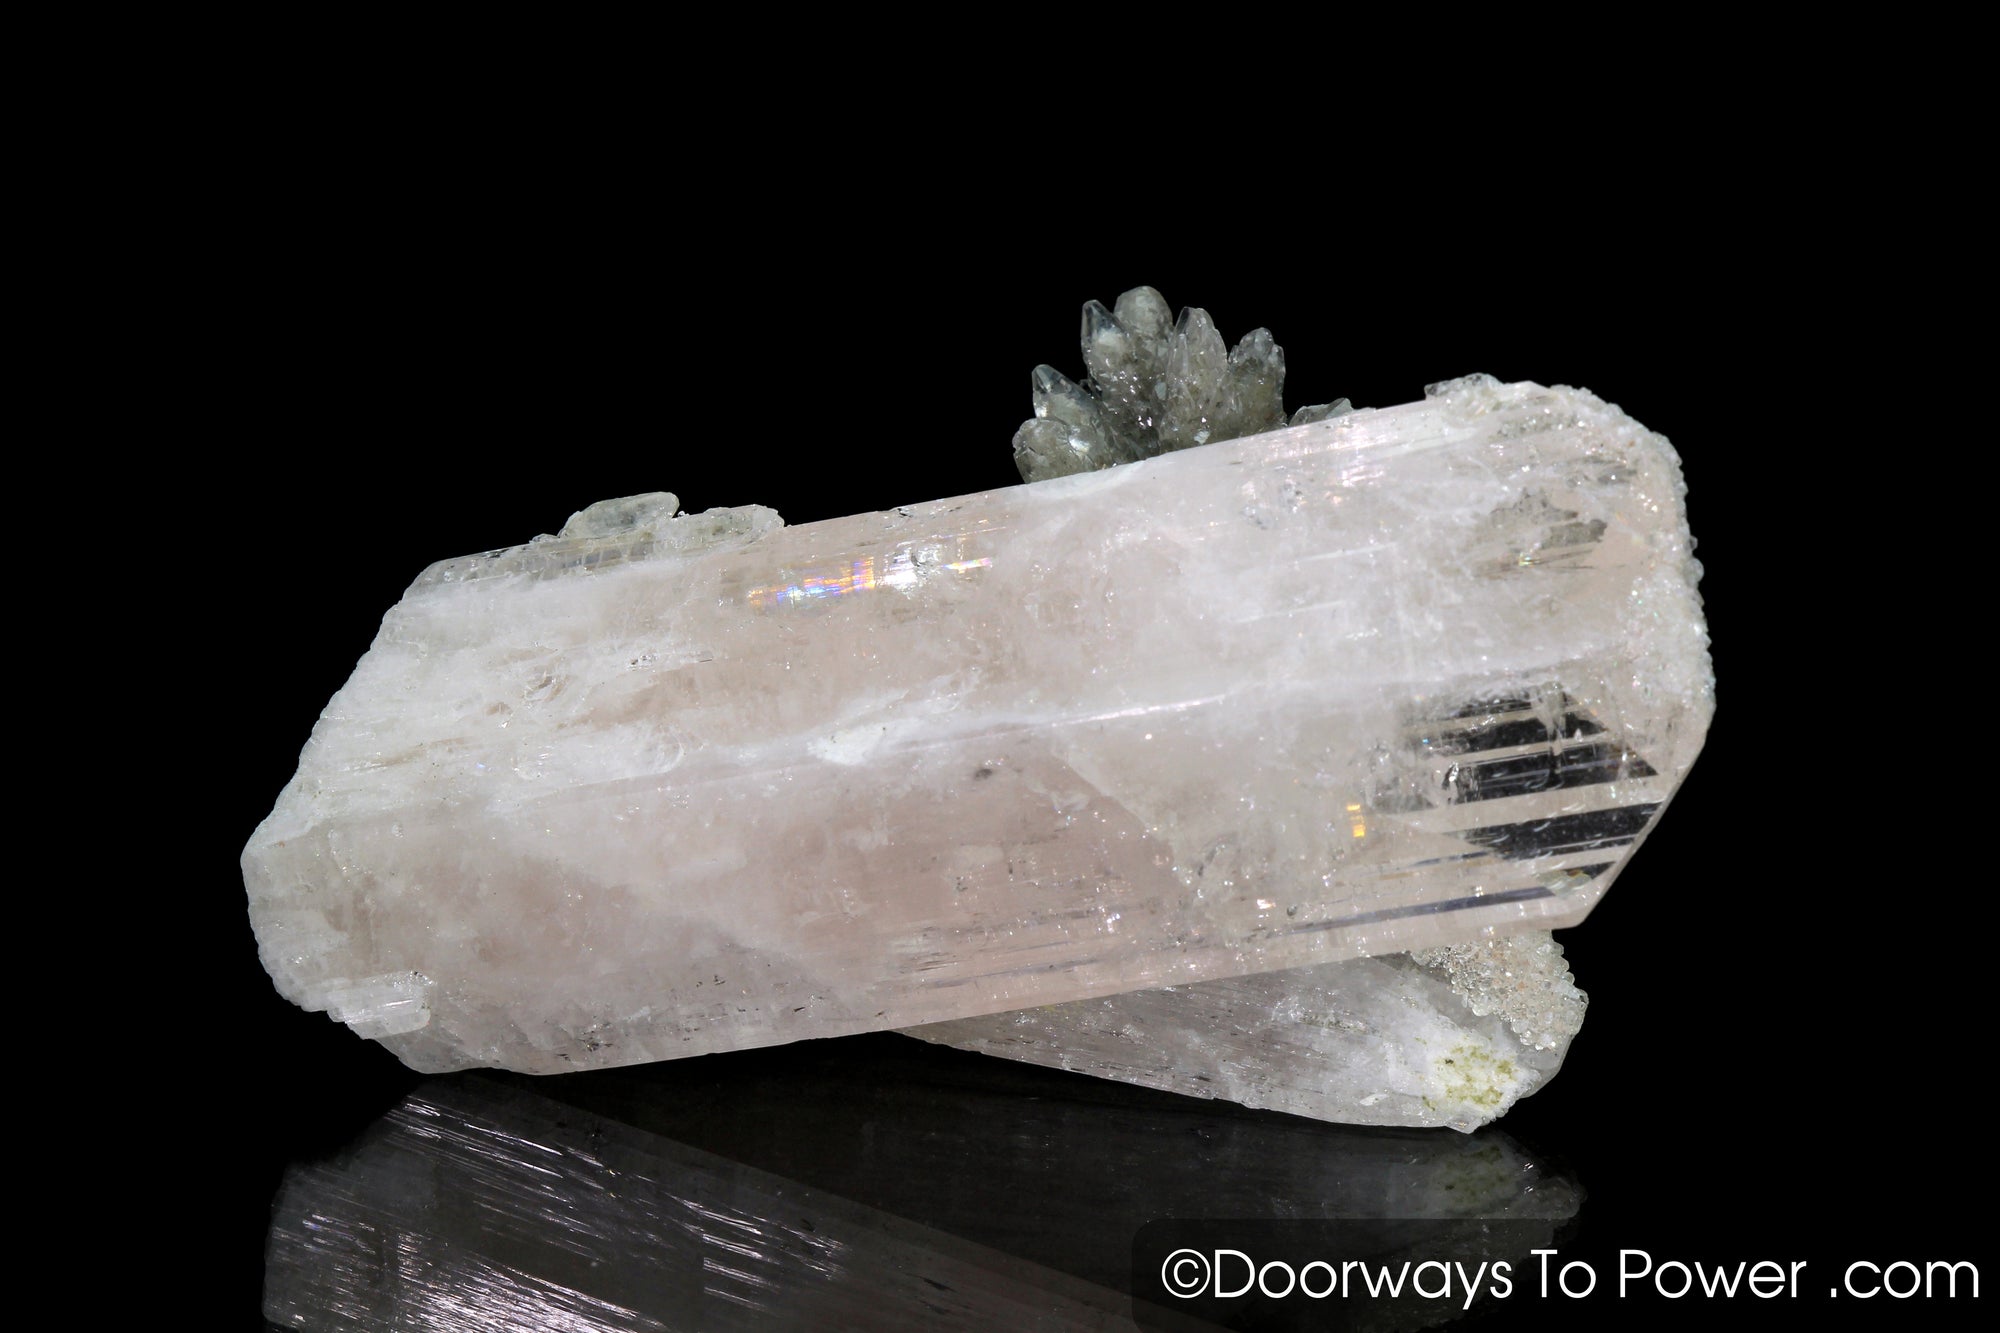 Danburite Twin Record Keeper Crystal | Covered in Druzy Crystals